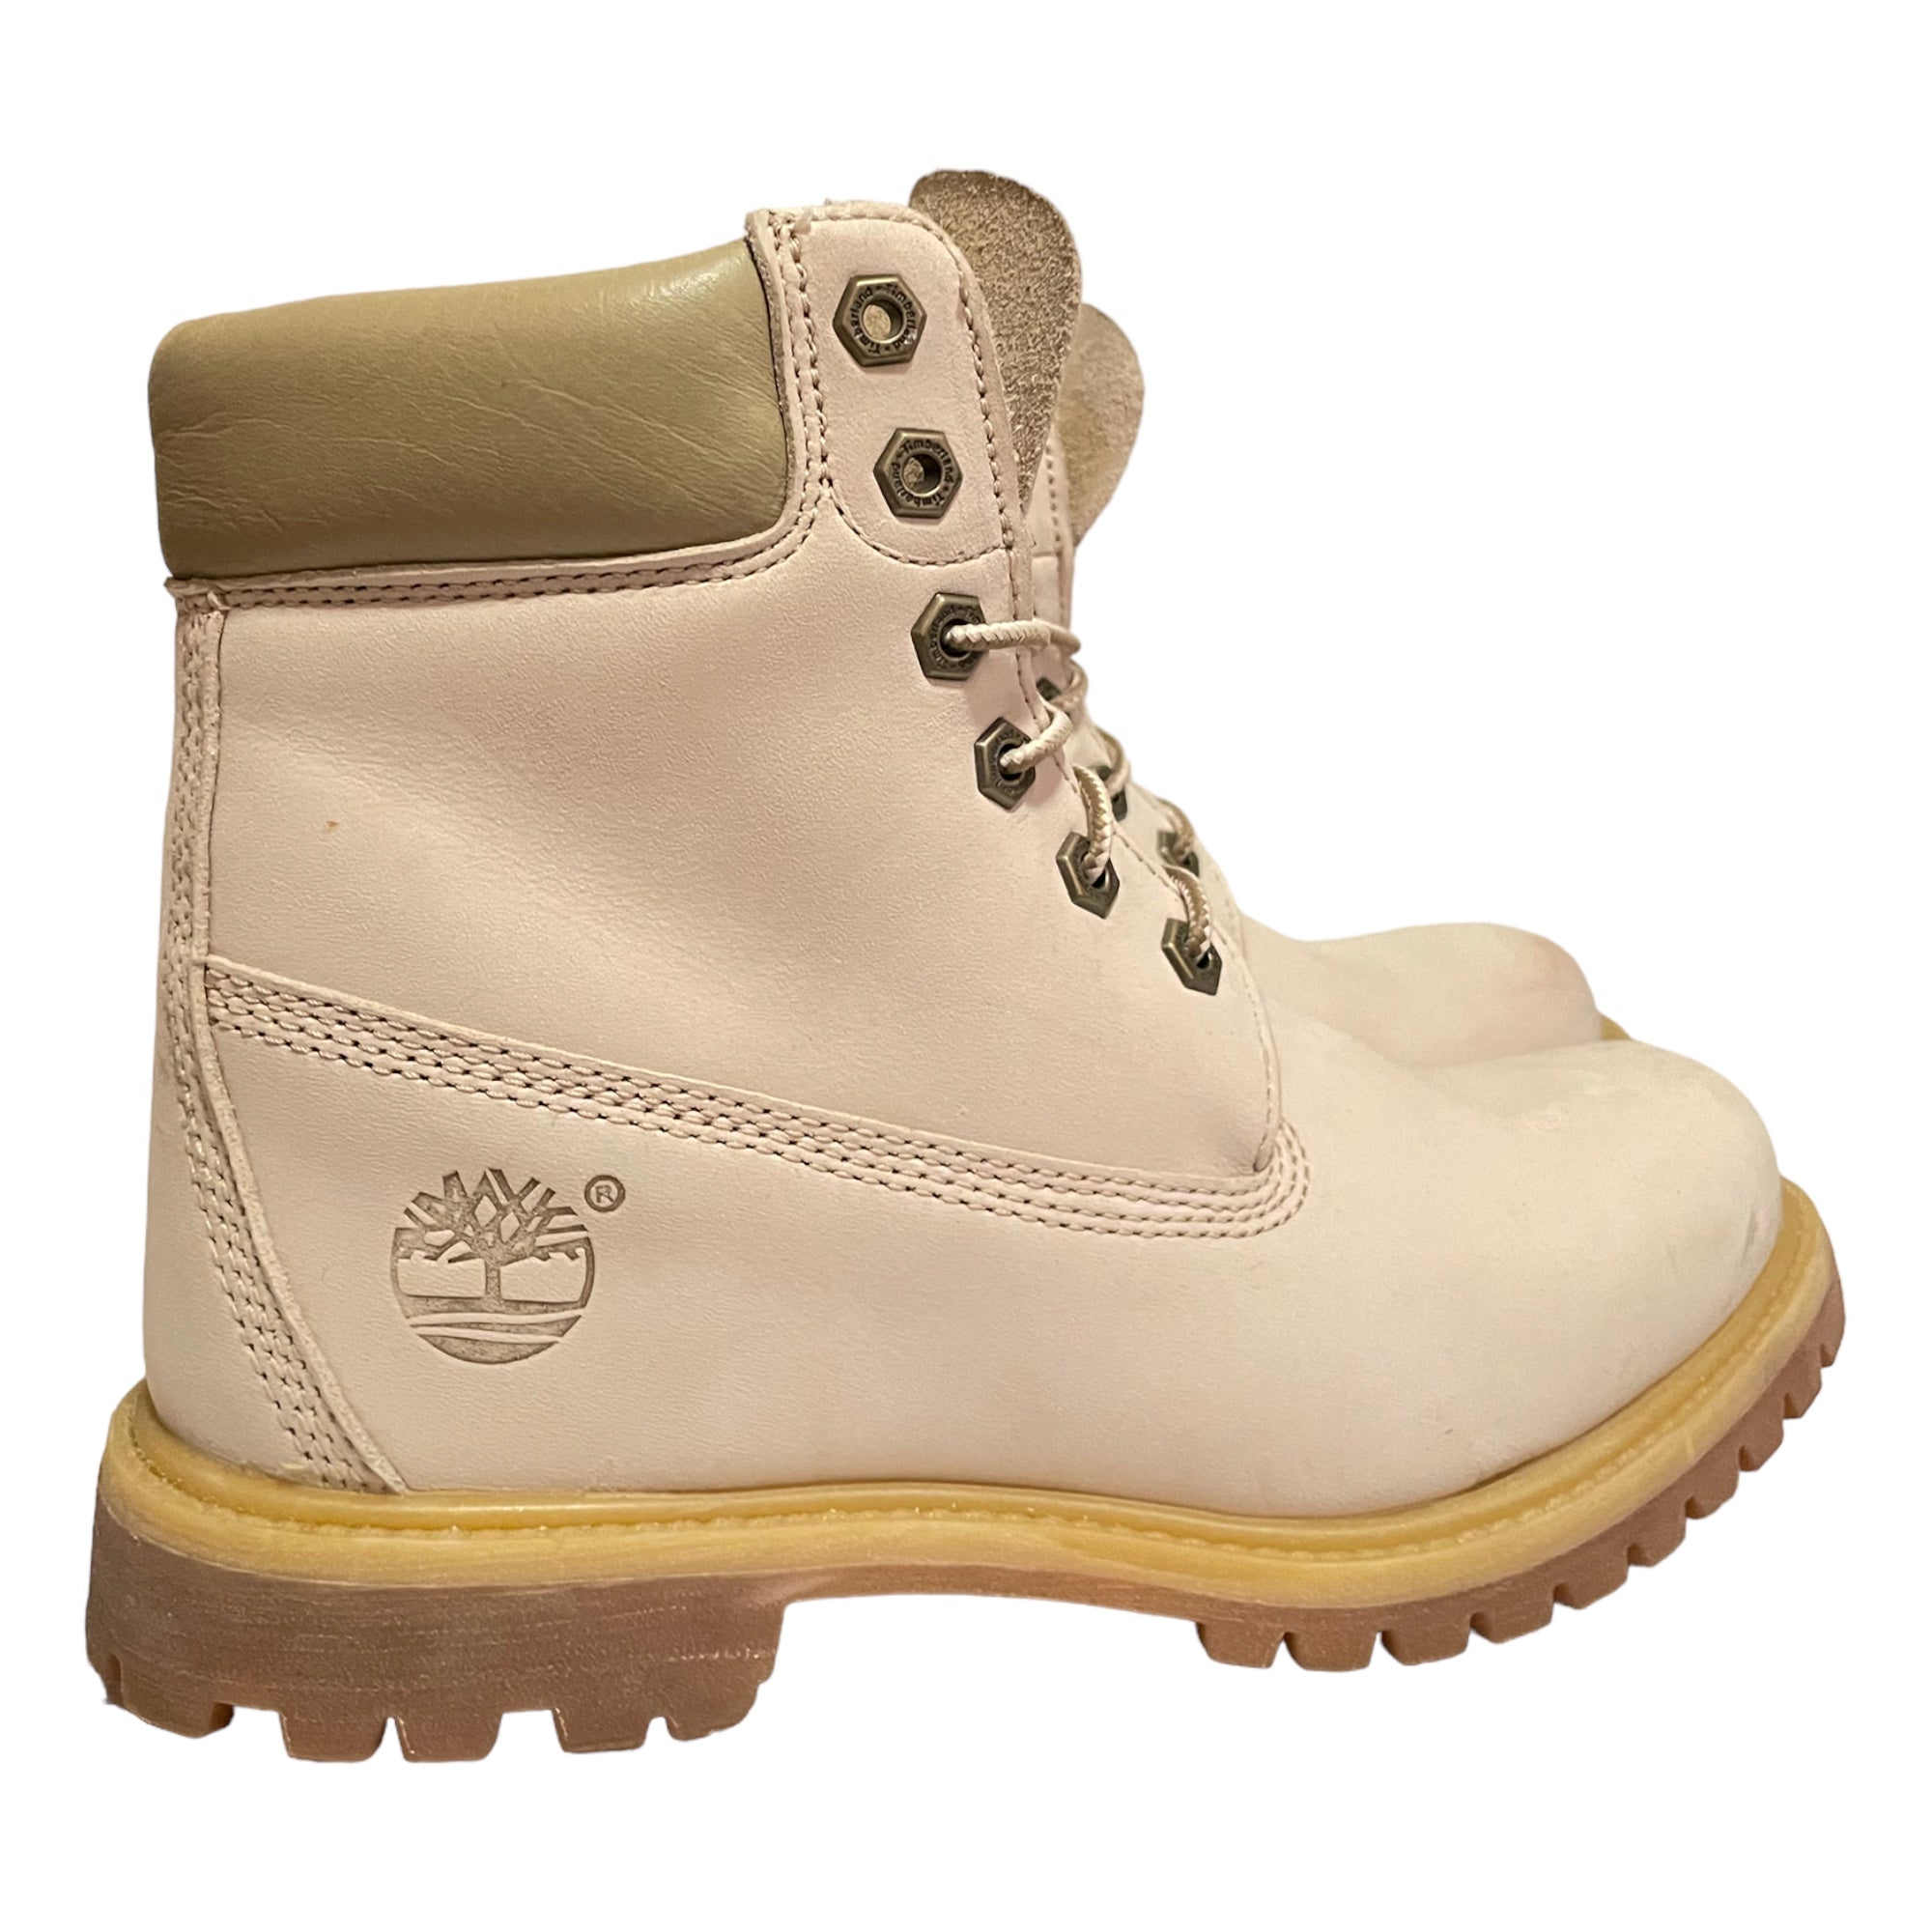 Women’s TIMBERLAND BOOTS Bone Color |Size: 7.5|